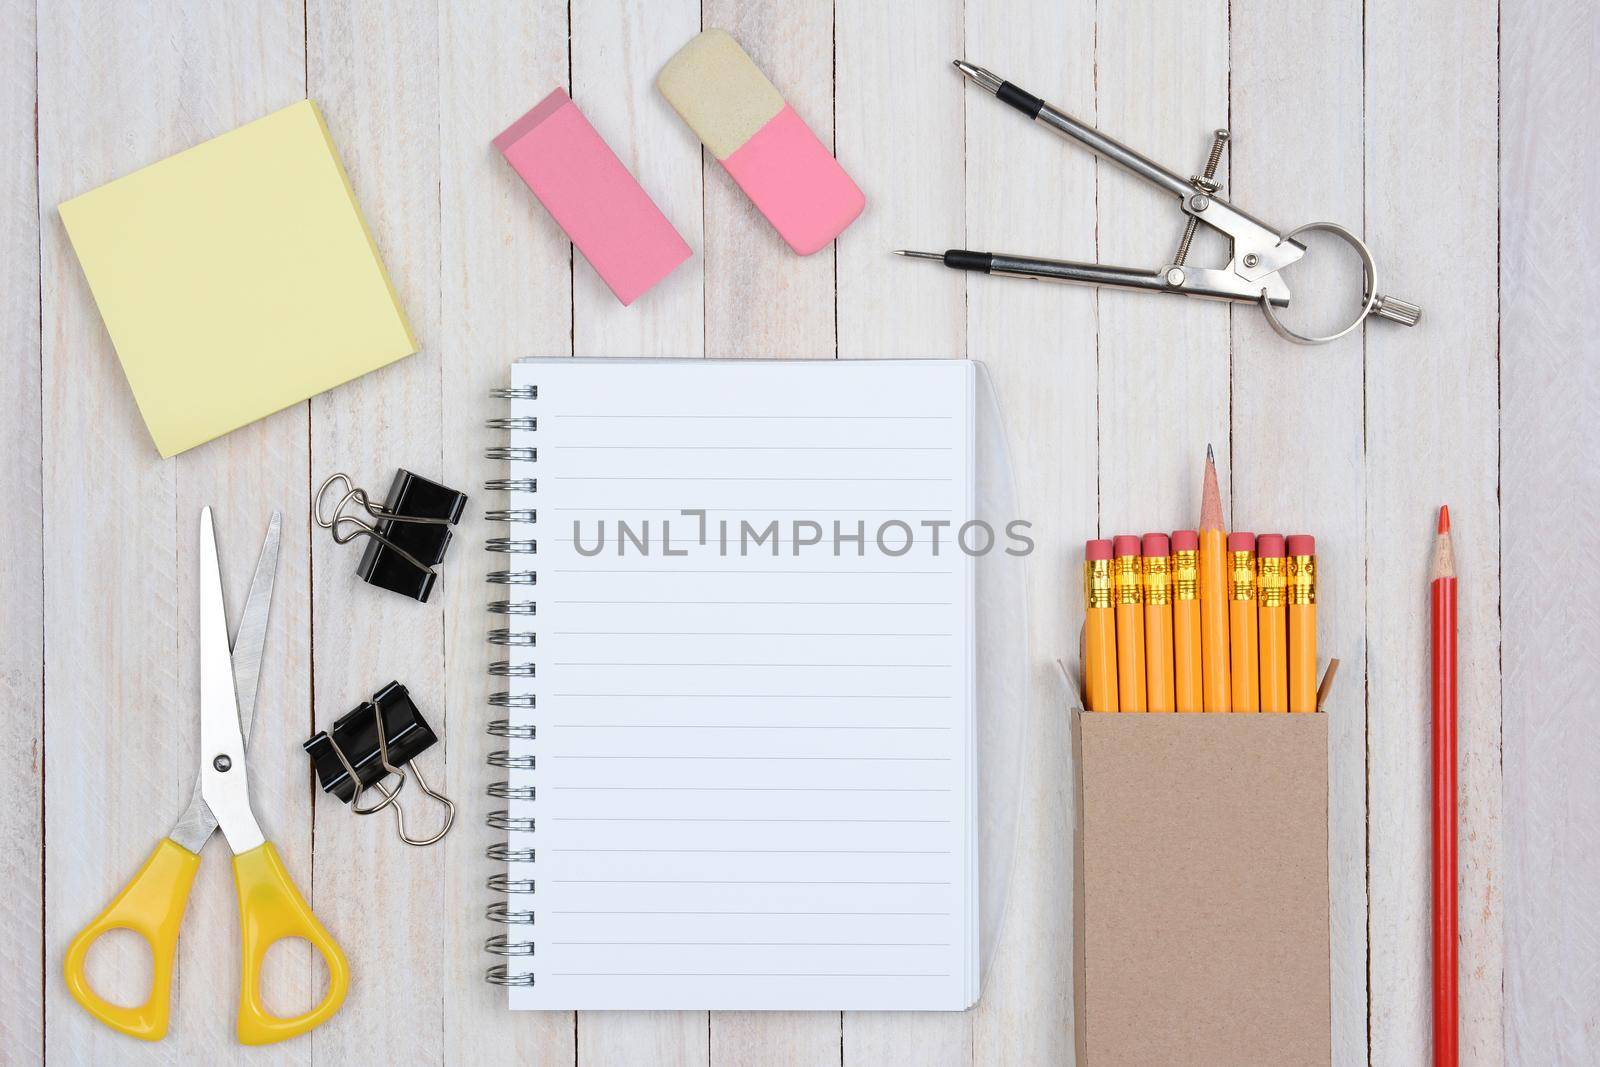 A group of items typically found in a school desk. Items include: erasers, pencils, compass, scissors, paper, note pad, paper clips, shot from a high angle.